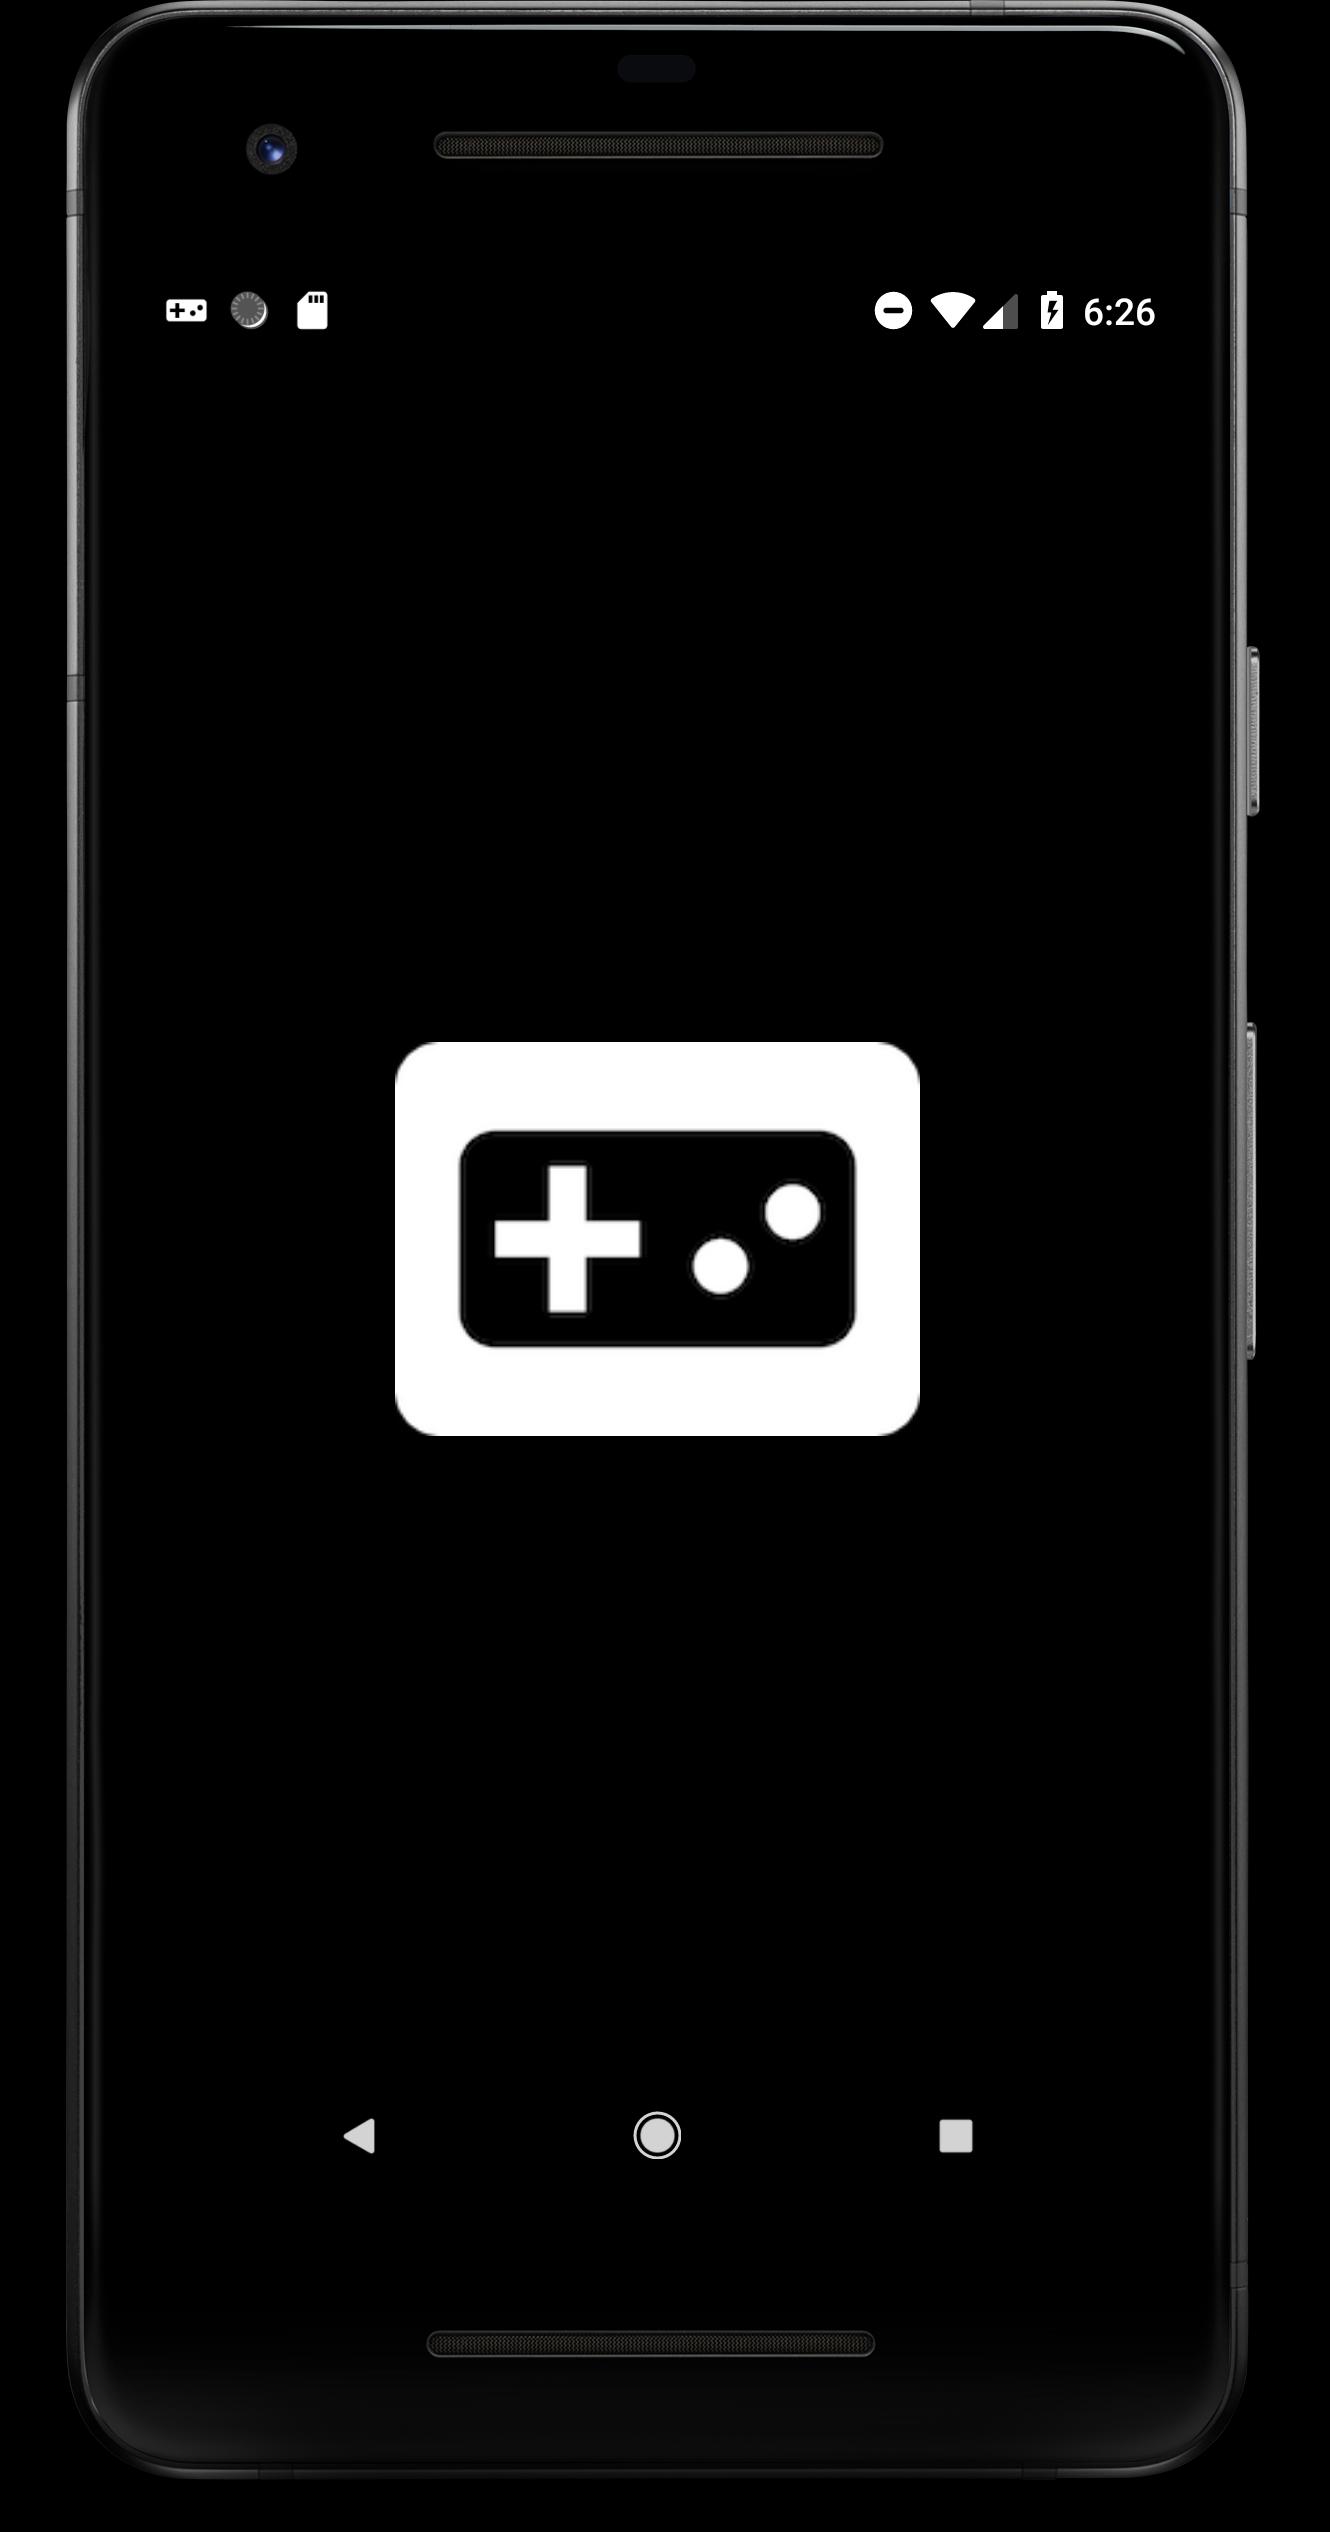 Gaming Mode for Android - APK Download - 